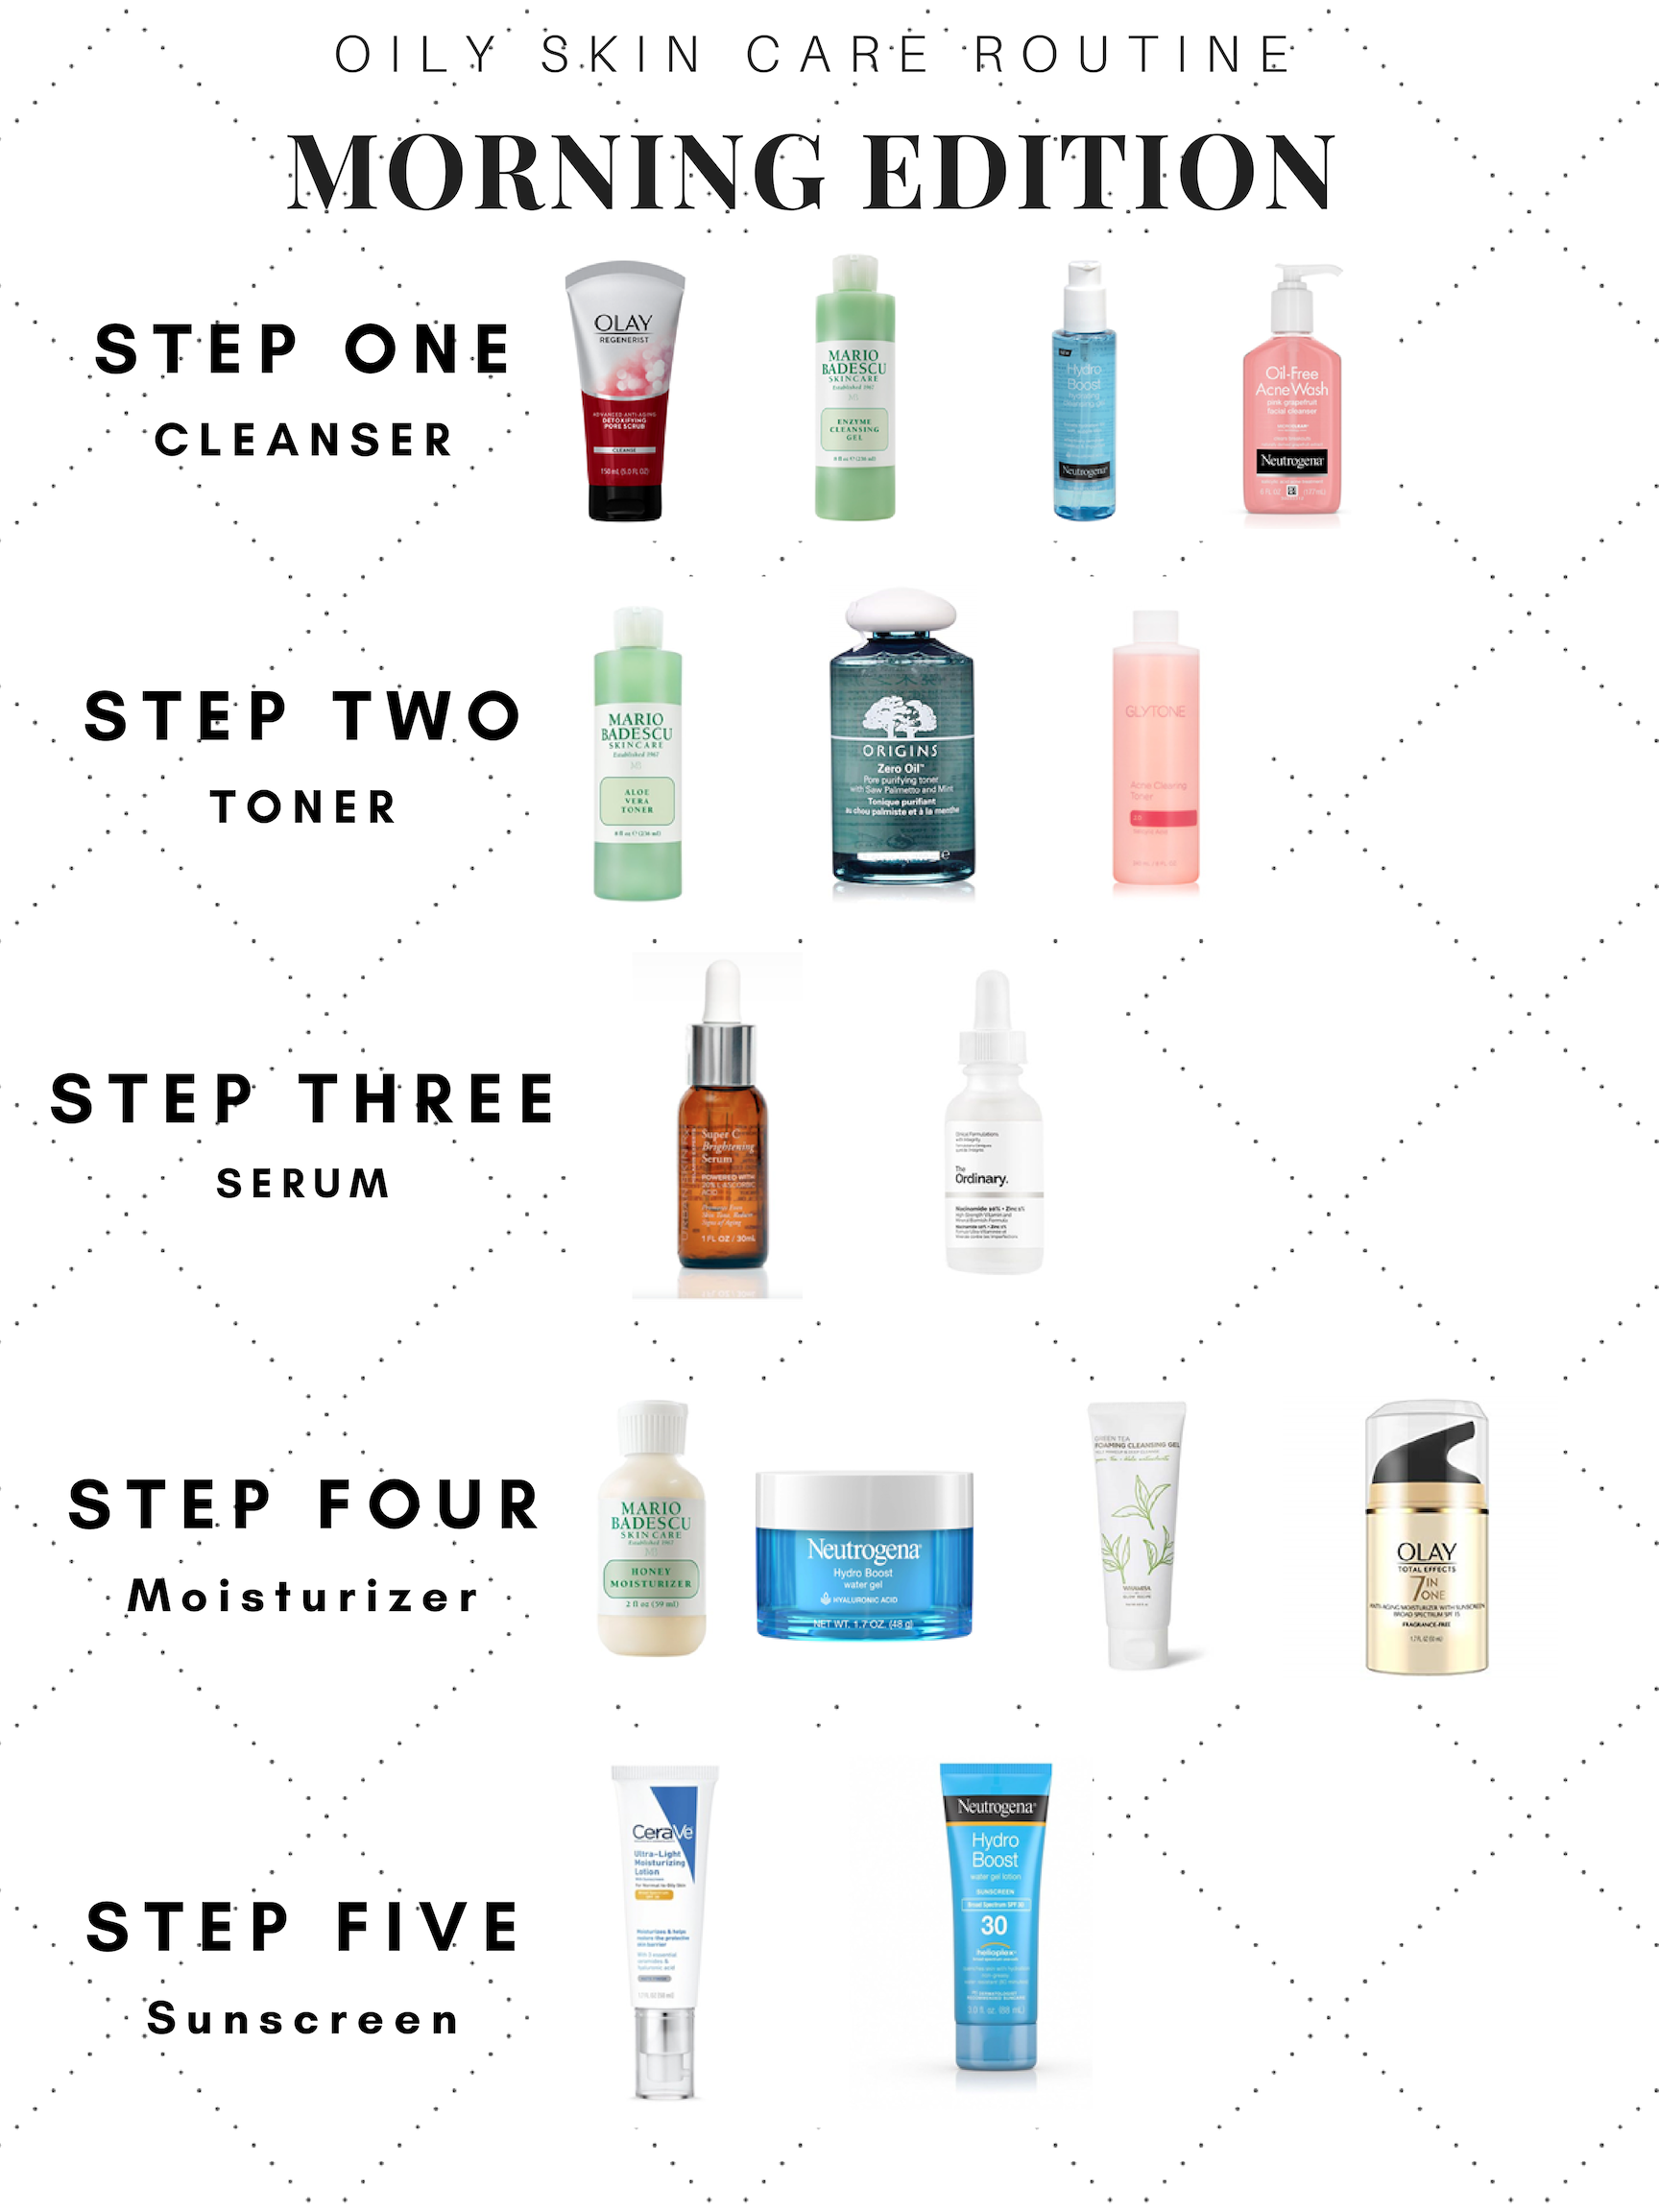 Morning oily skin care routine. Step by step skin care guide with ...